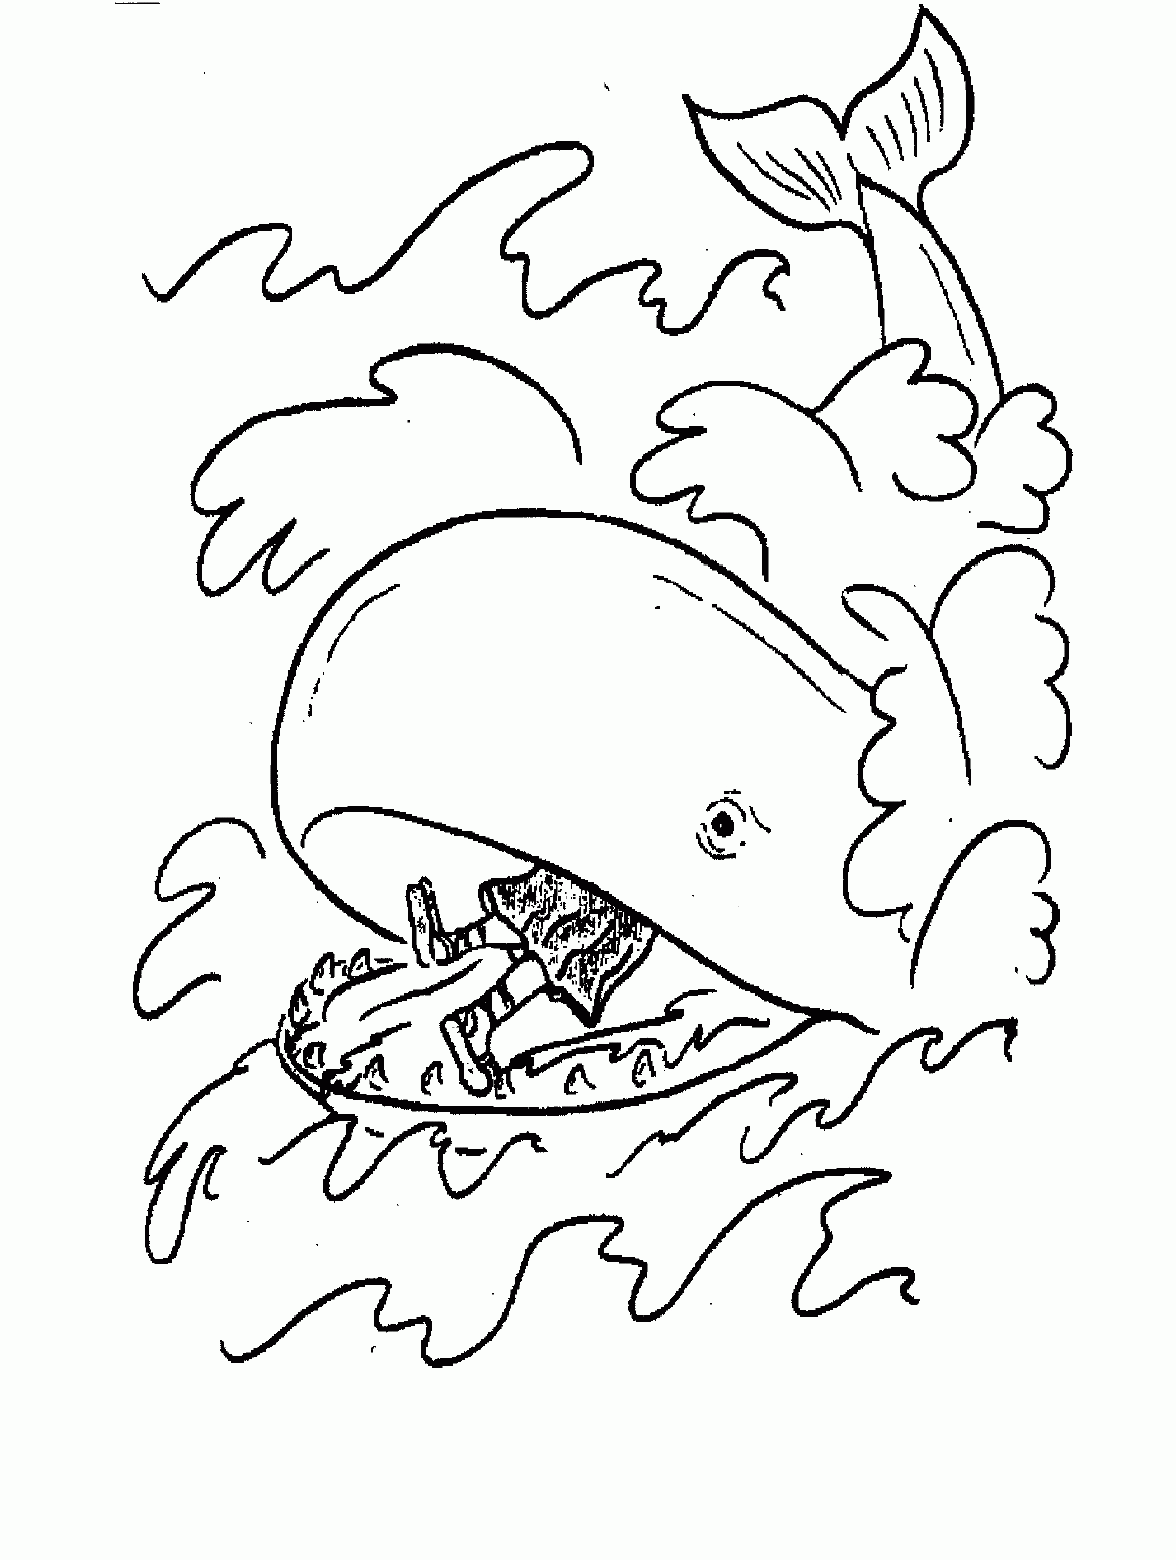 jonah-and-the-whale-colouring-clip-art-library